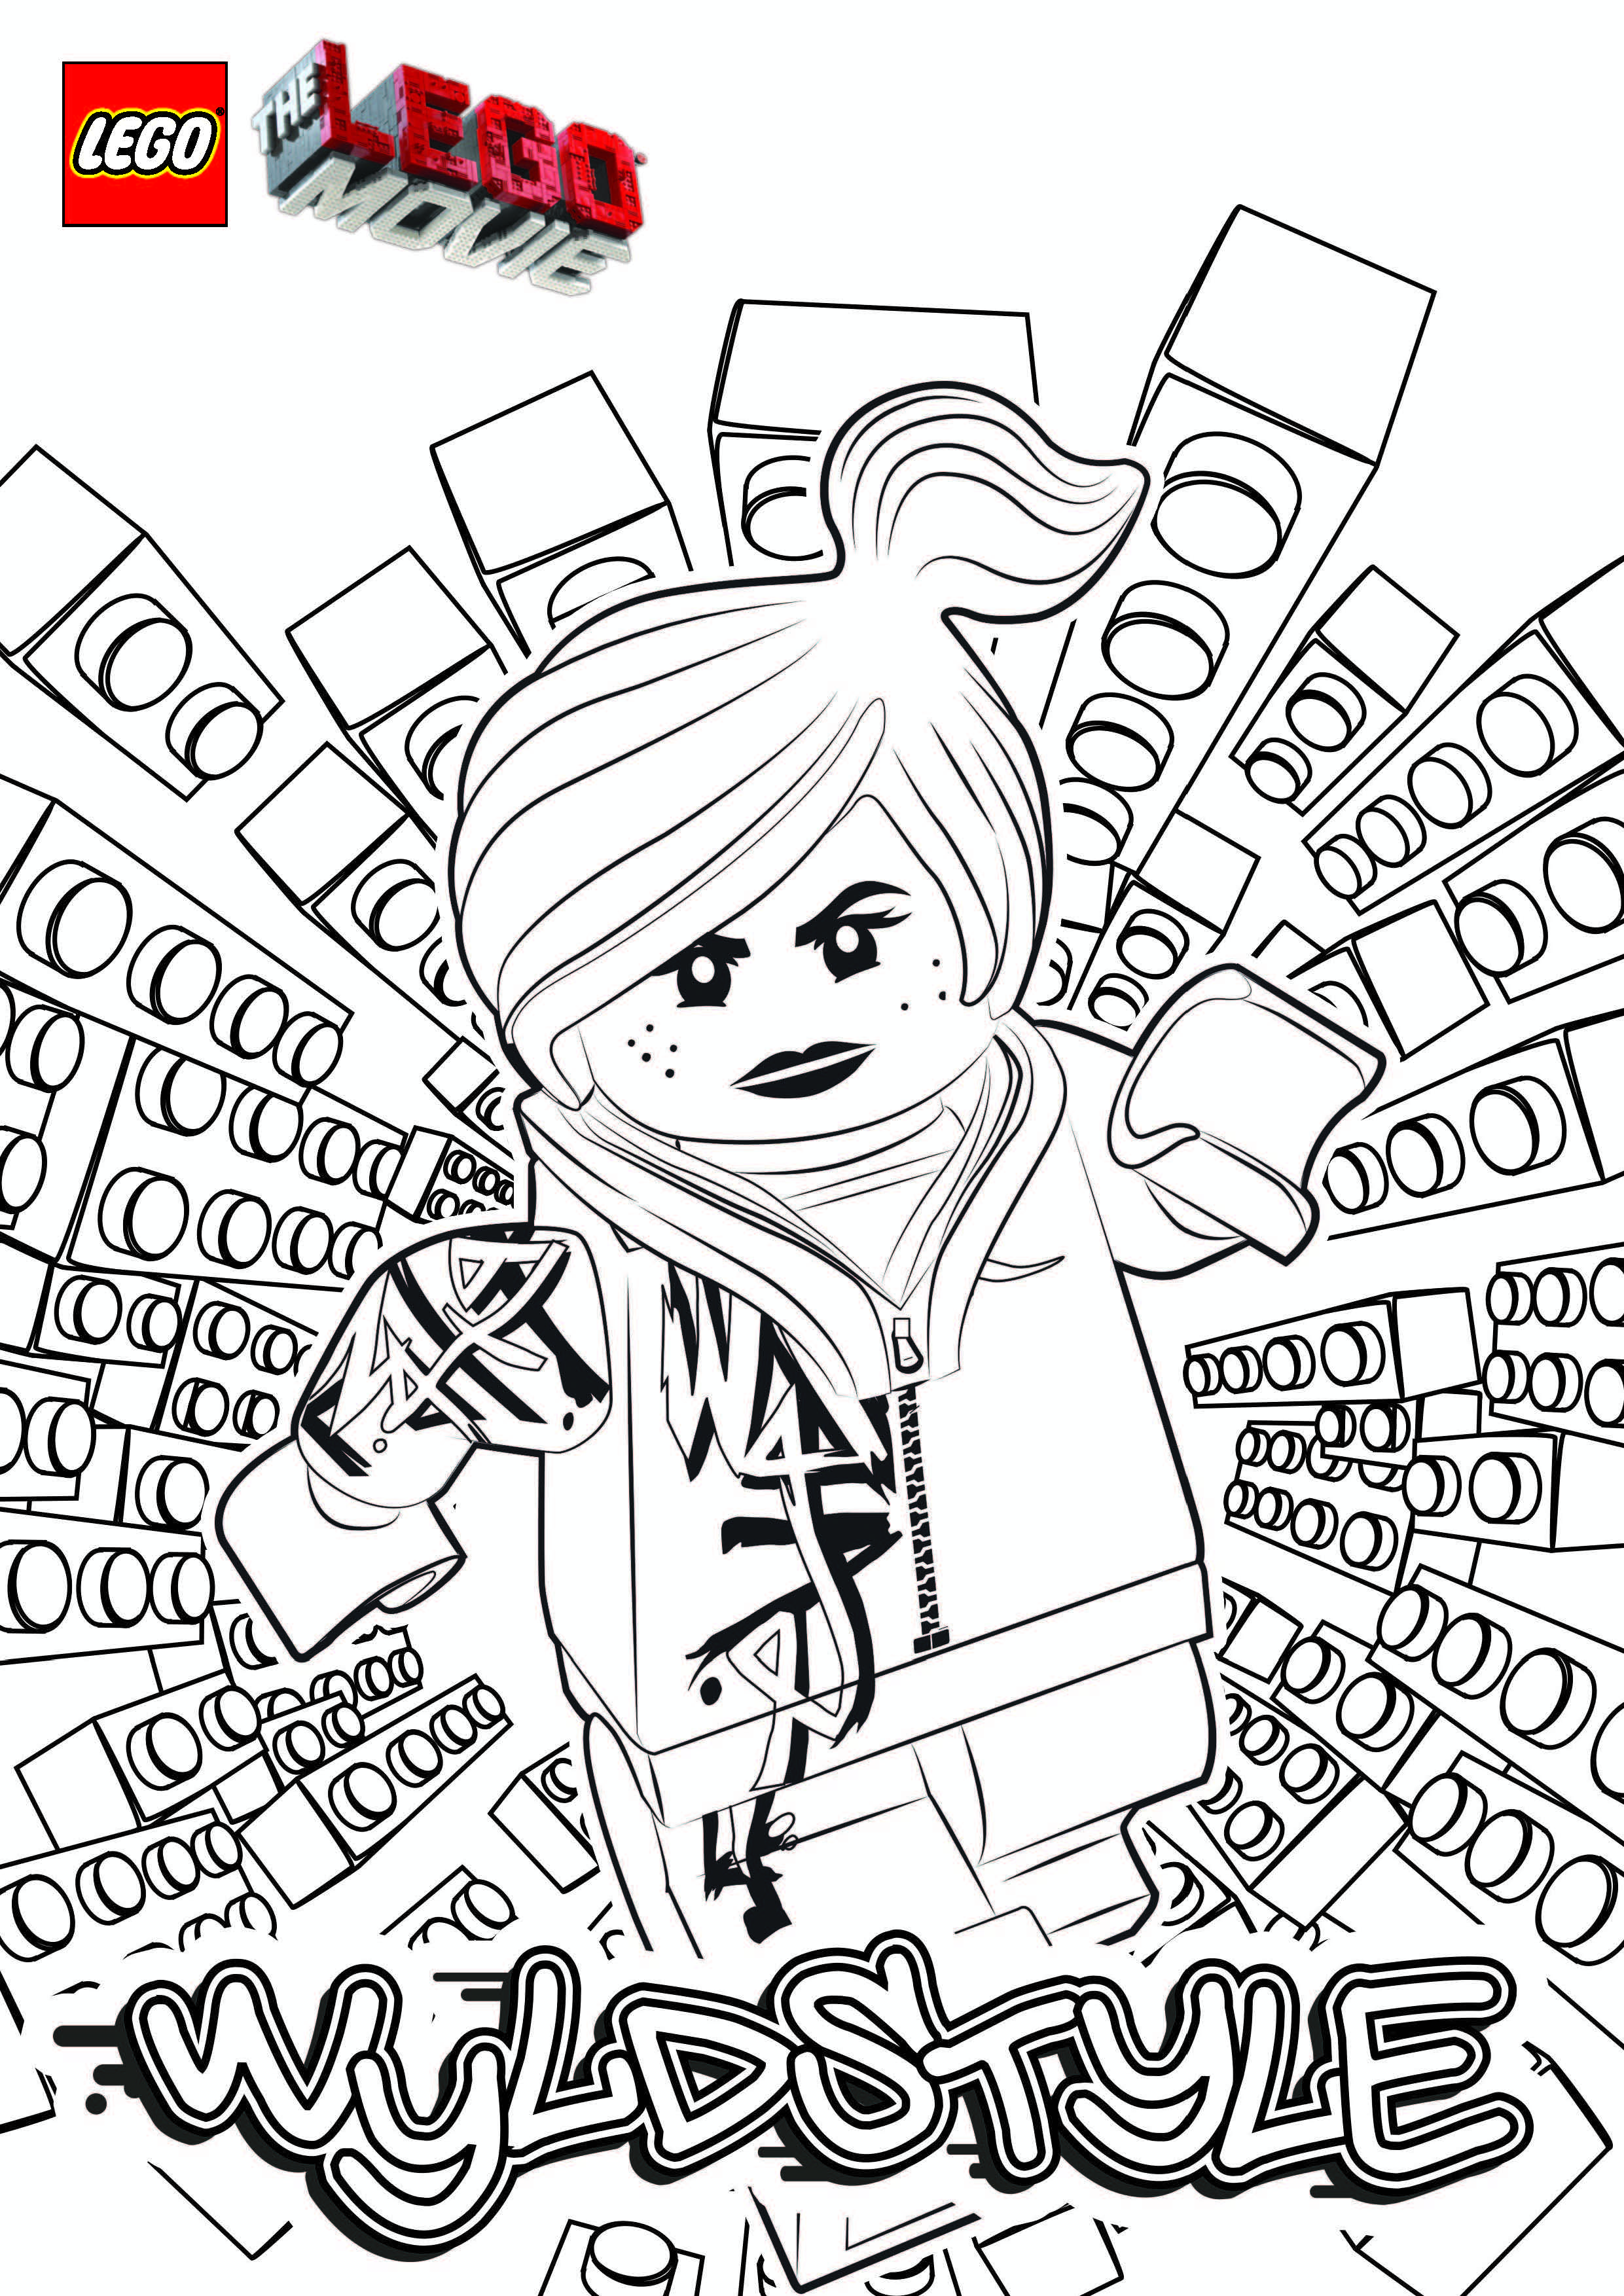 The Lego Movie Coloring Pages - Coloring Home